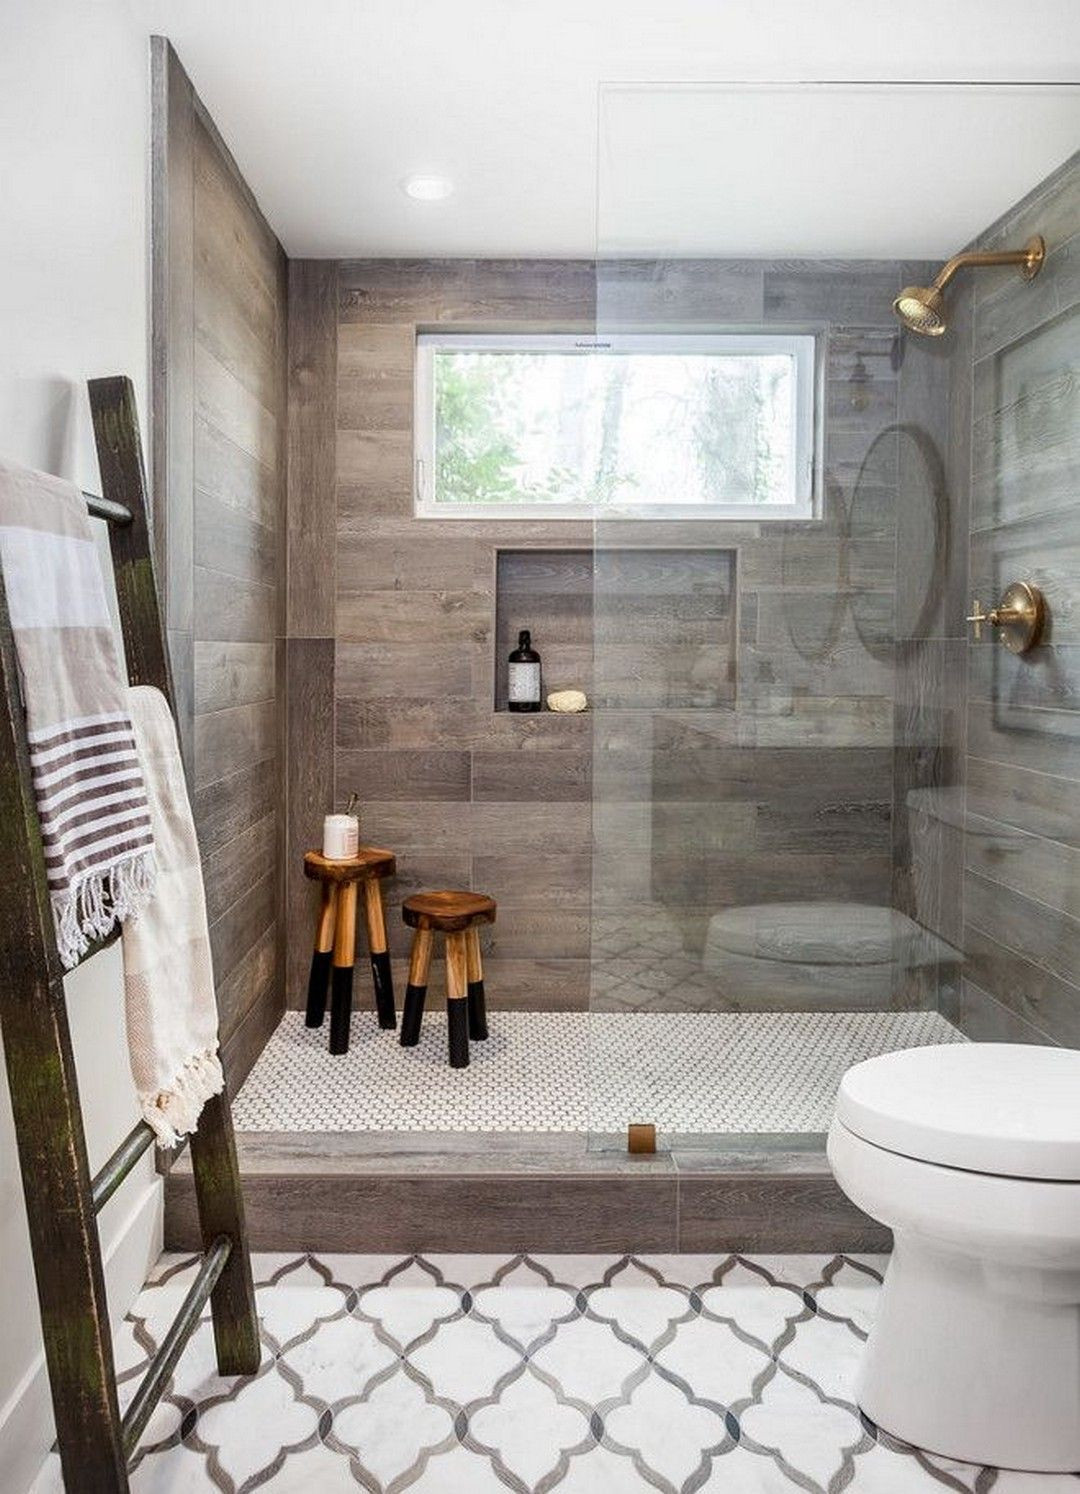 Wood Look Tile Bathrooms
 15 Wood Tile Showers For Your Bathroom